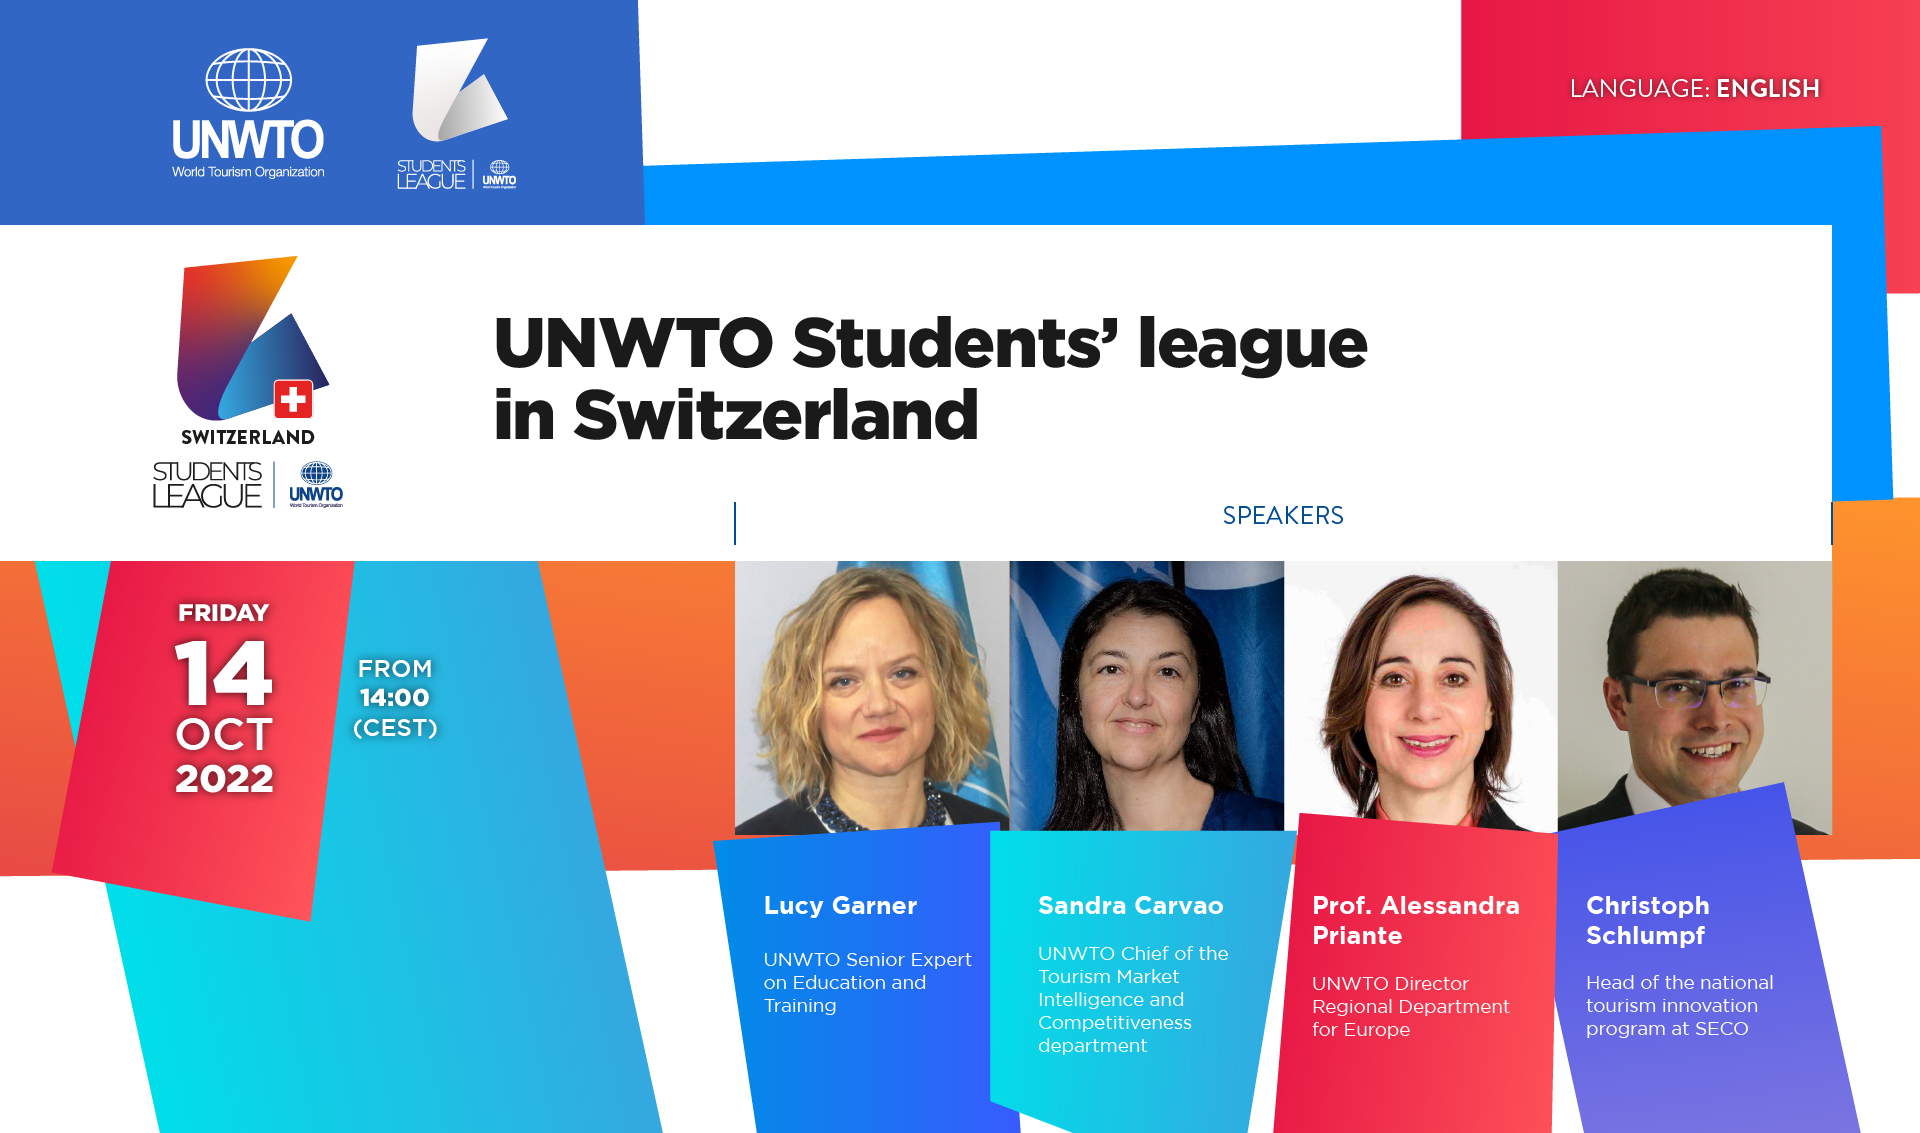 1ST ONLINE LEARNING SESSION FOR THE STUDENTS OF THE UNWTO STUDENTS' LEAGUE-SWITZERLAND